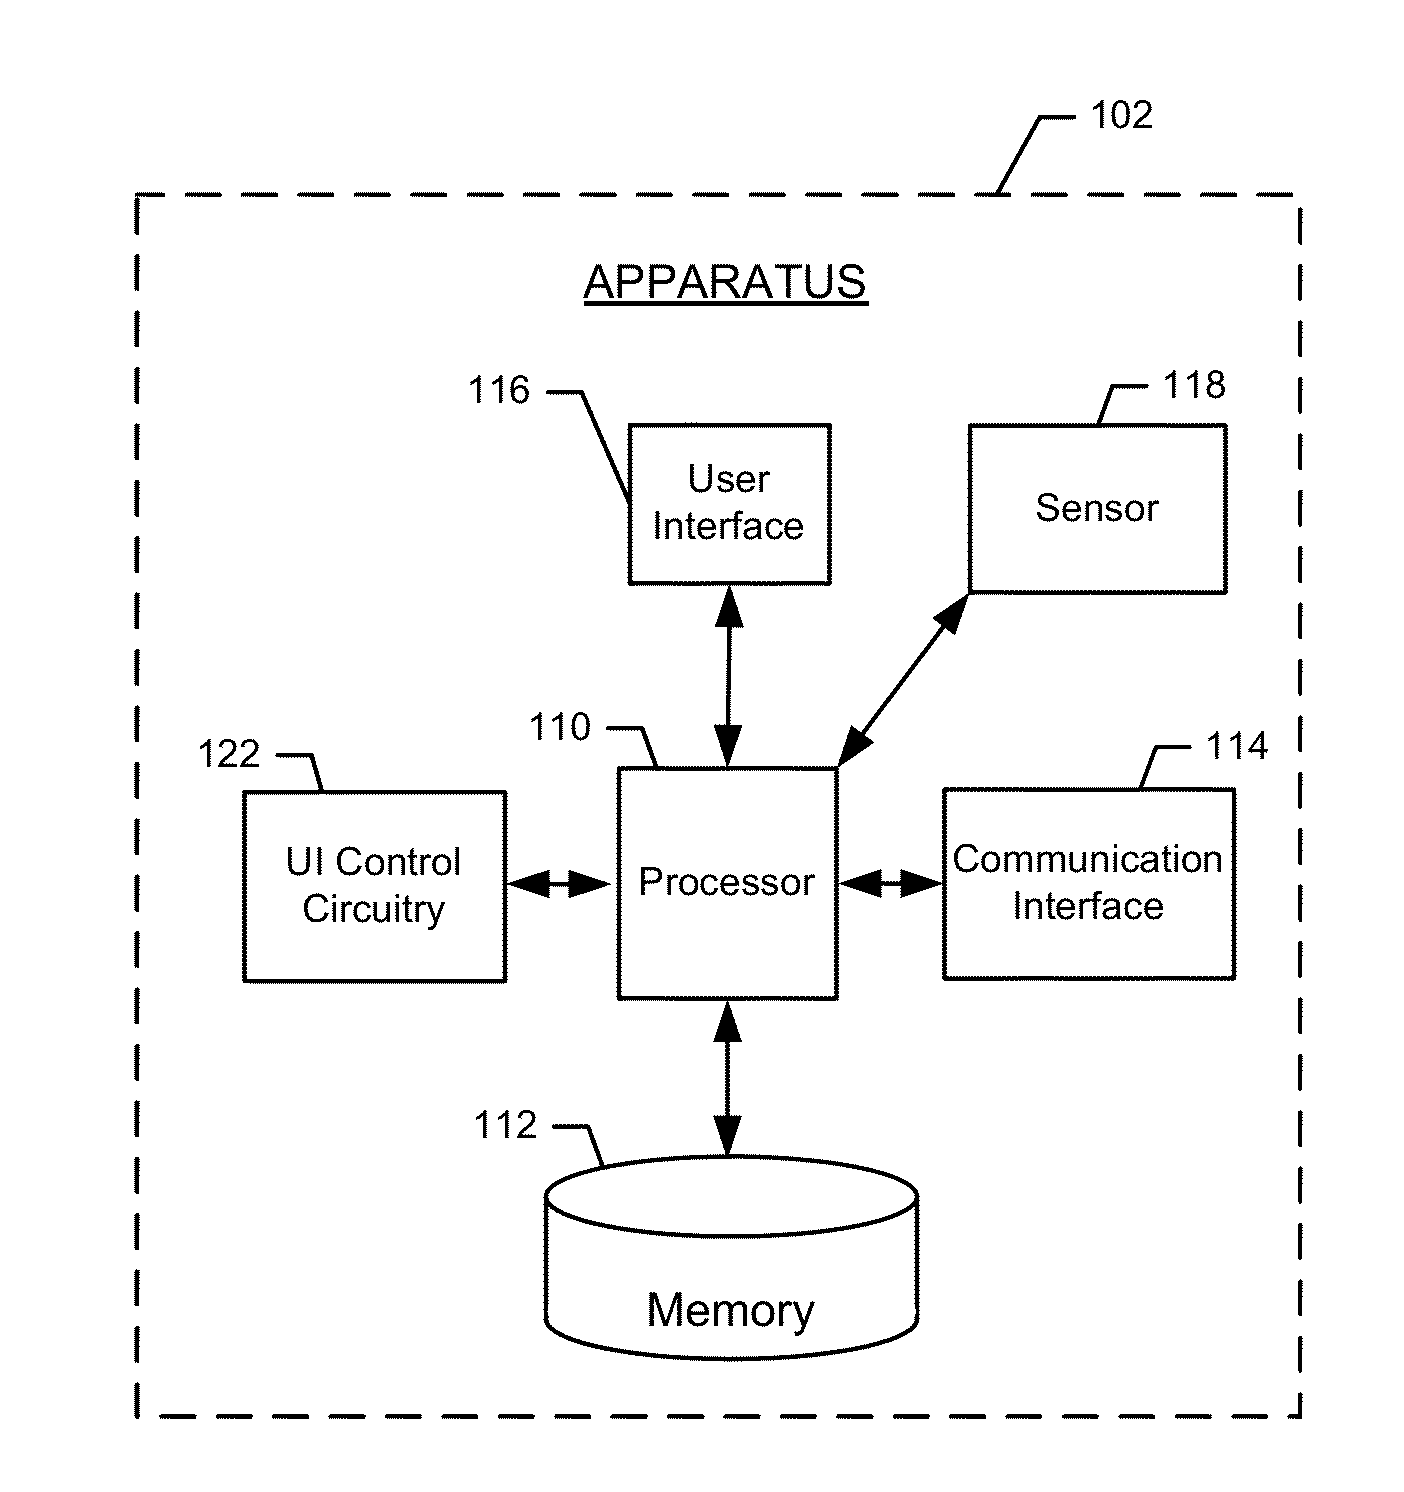 Method and apparatus for attracting a user's gaze to information in a non-intrusive manner